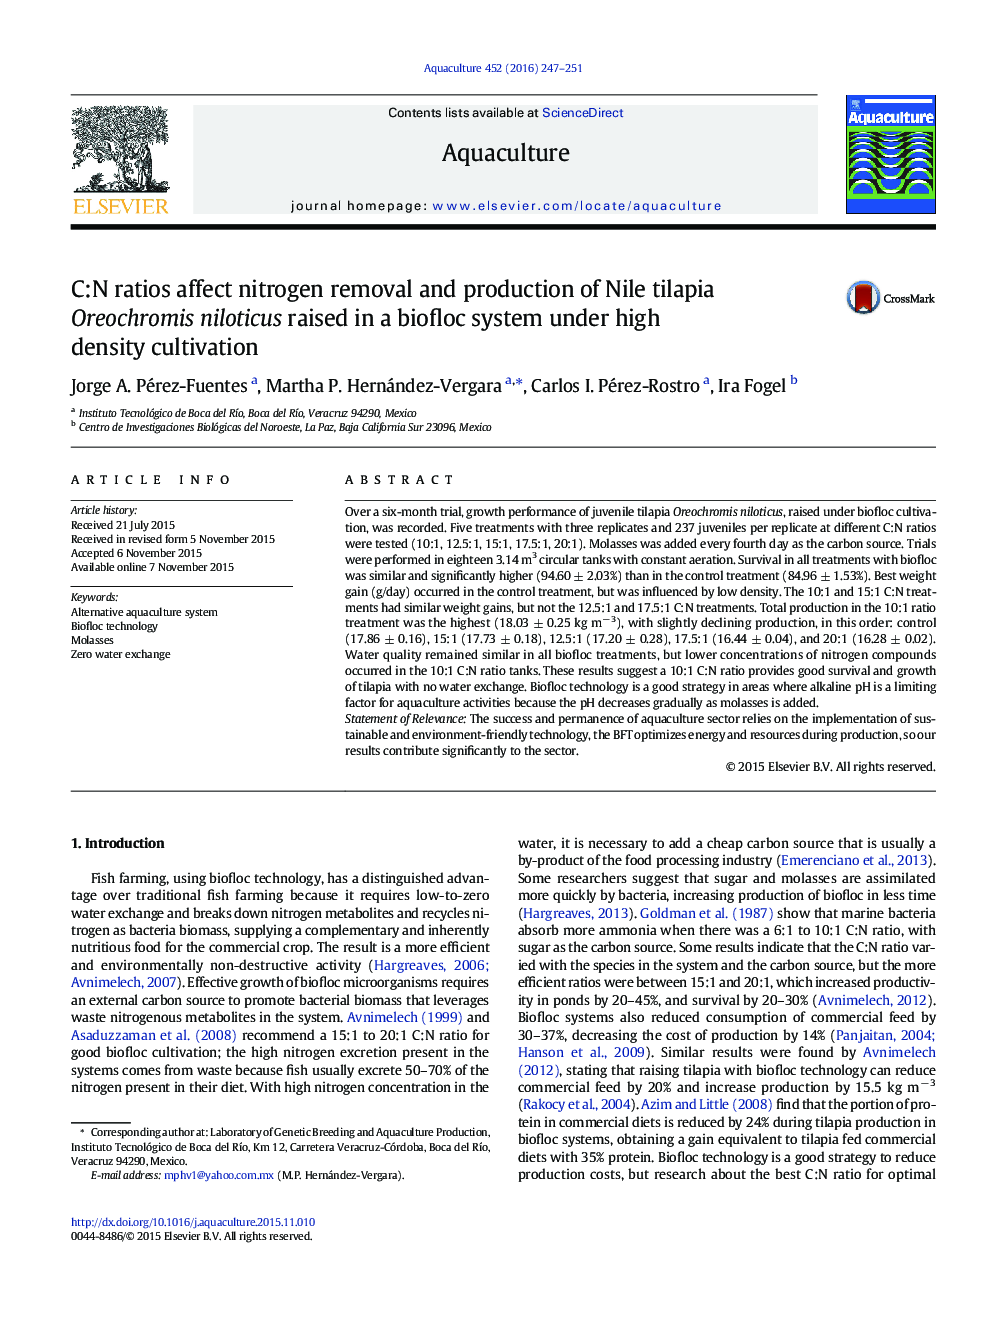 C:N ratios affect nitrogen removal and production of Nile tilapia Oreochromis niloticus raised in a biofloc system under high density cultivation